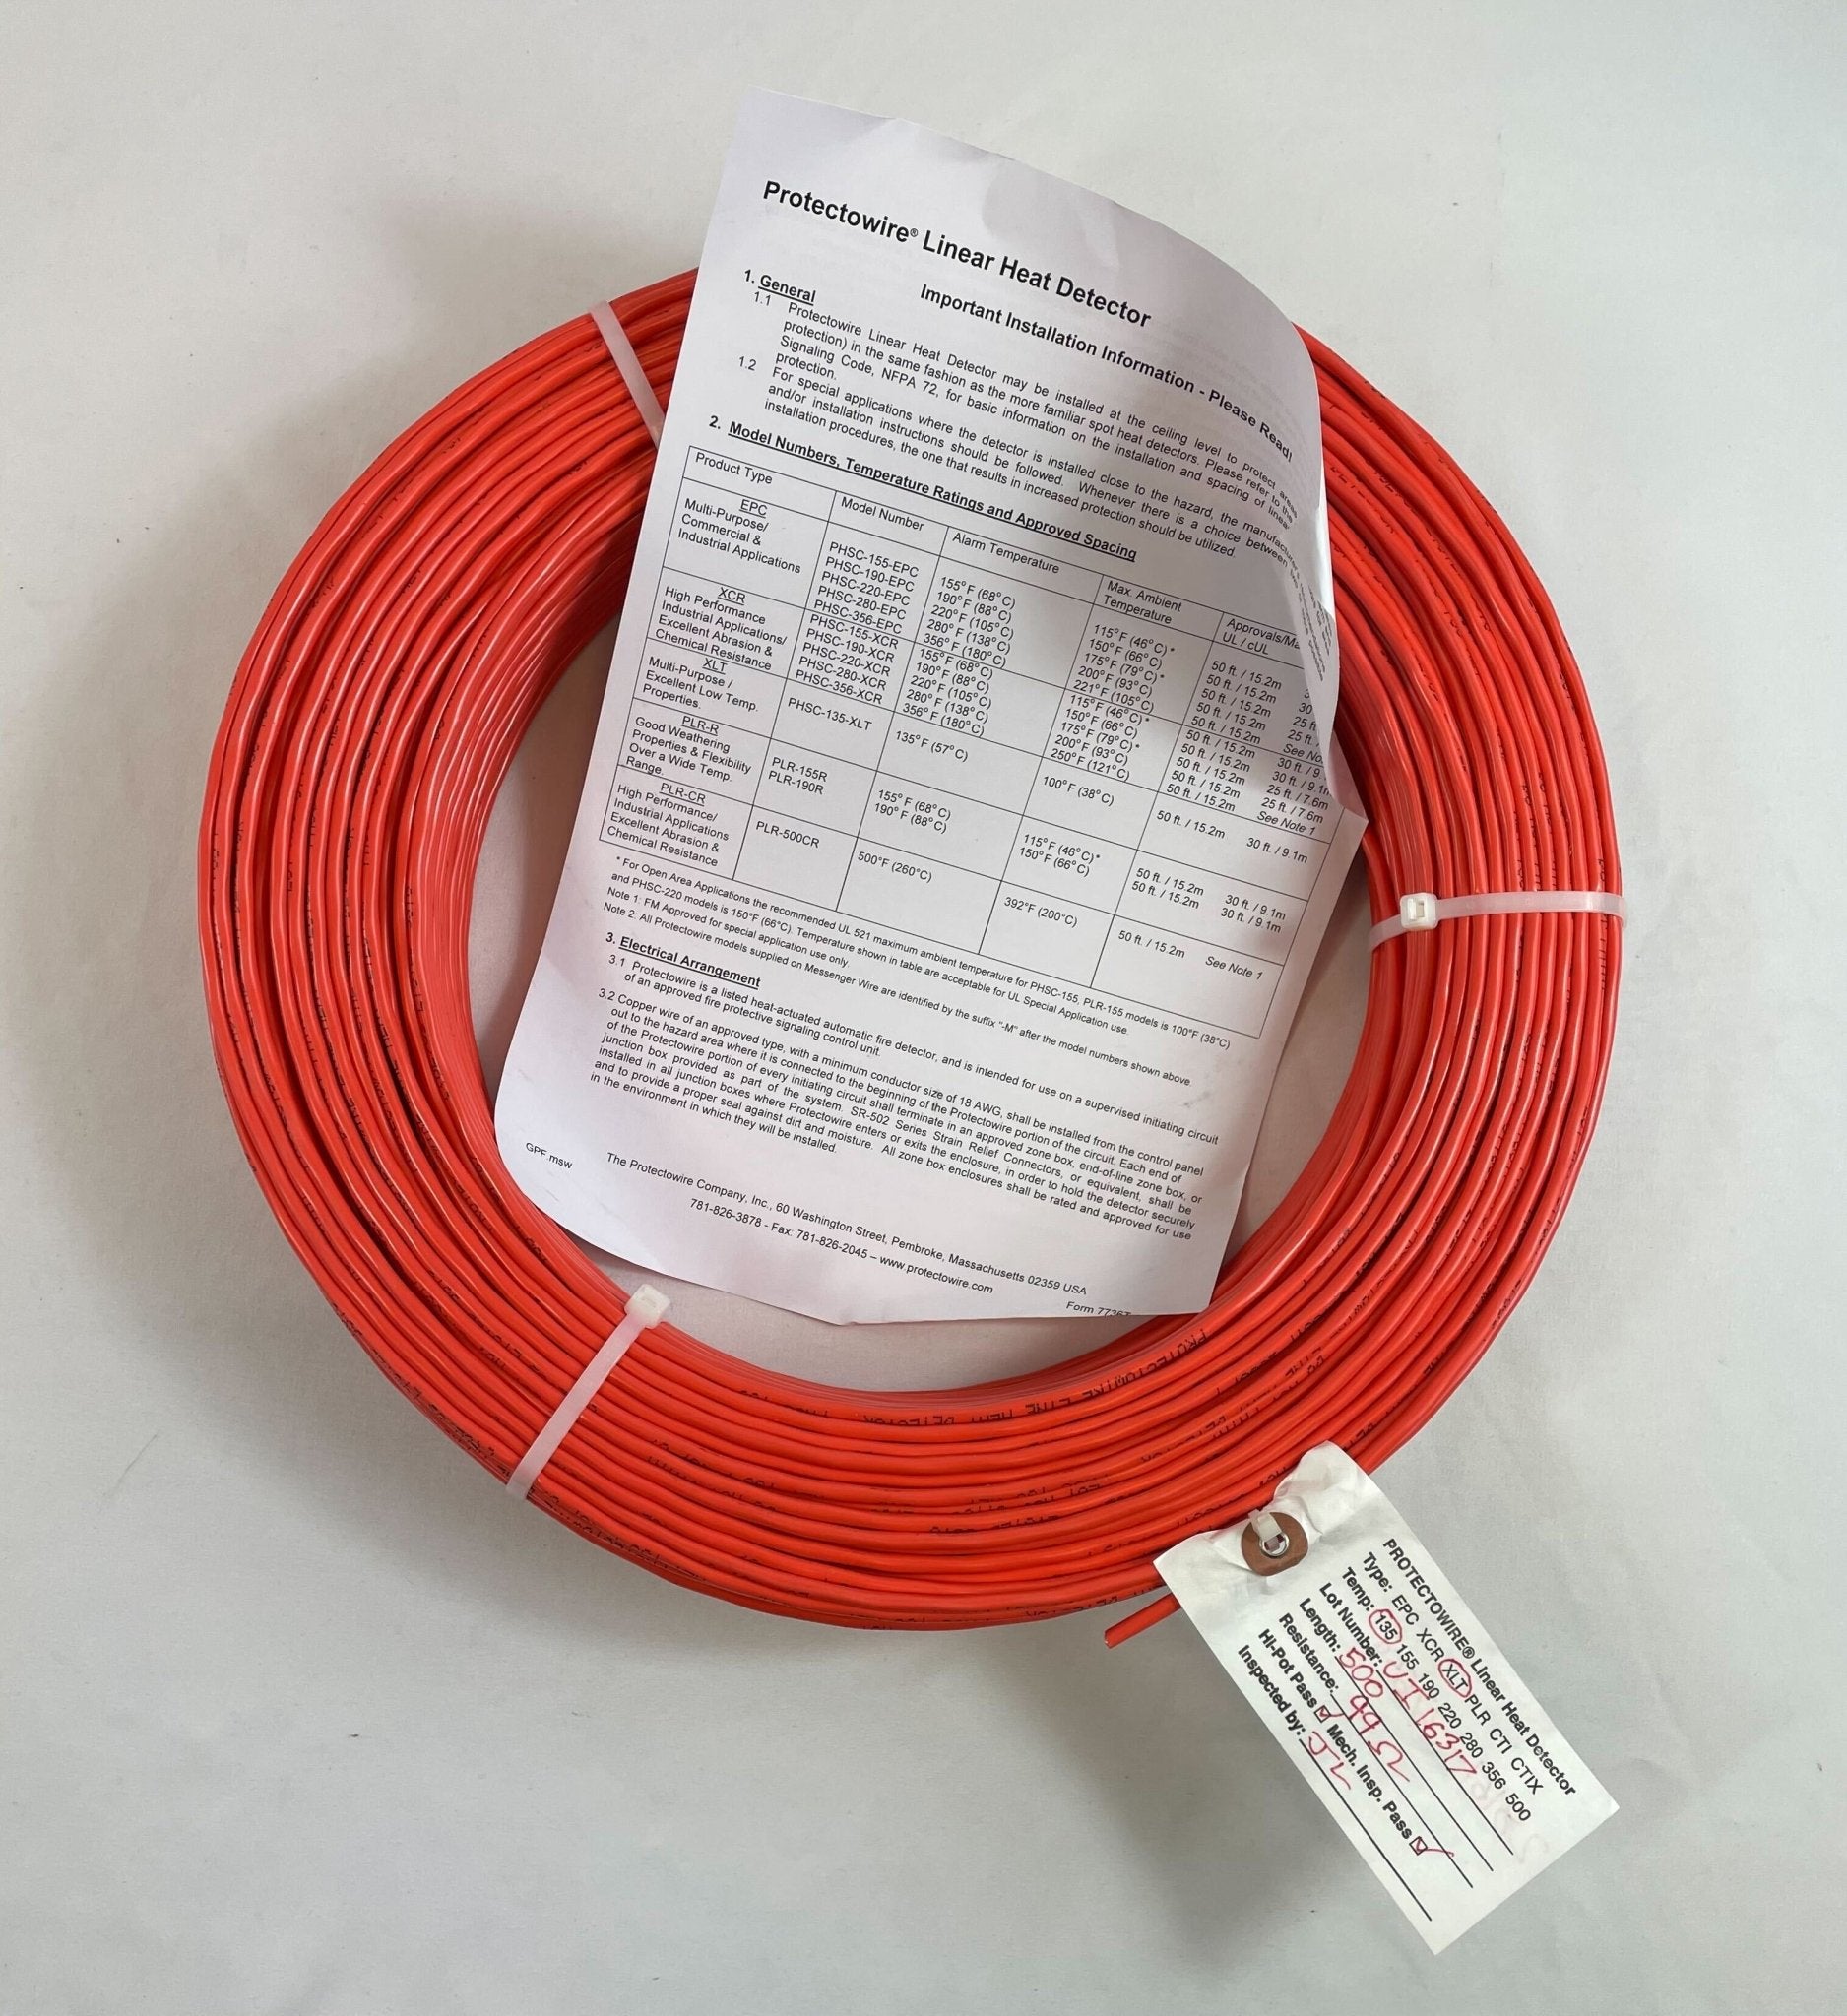 Protectowire PHSC-135-XLT 500 Ft - The Fire Alarm Supplier